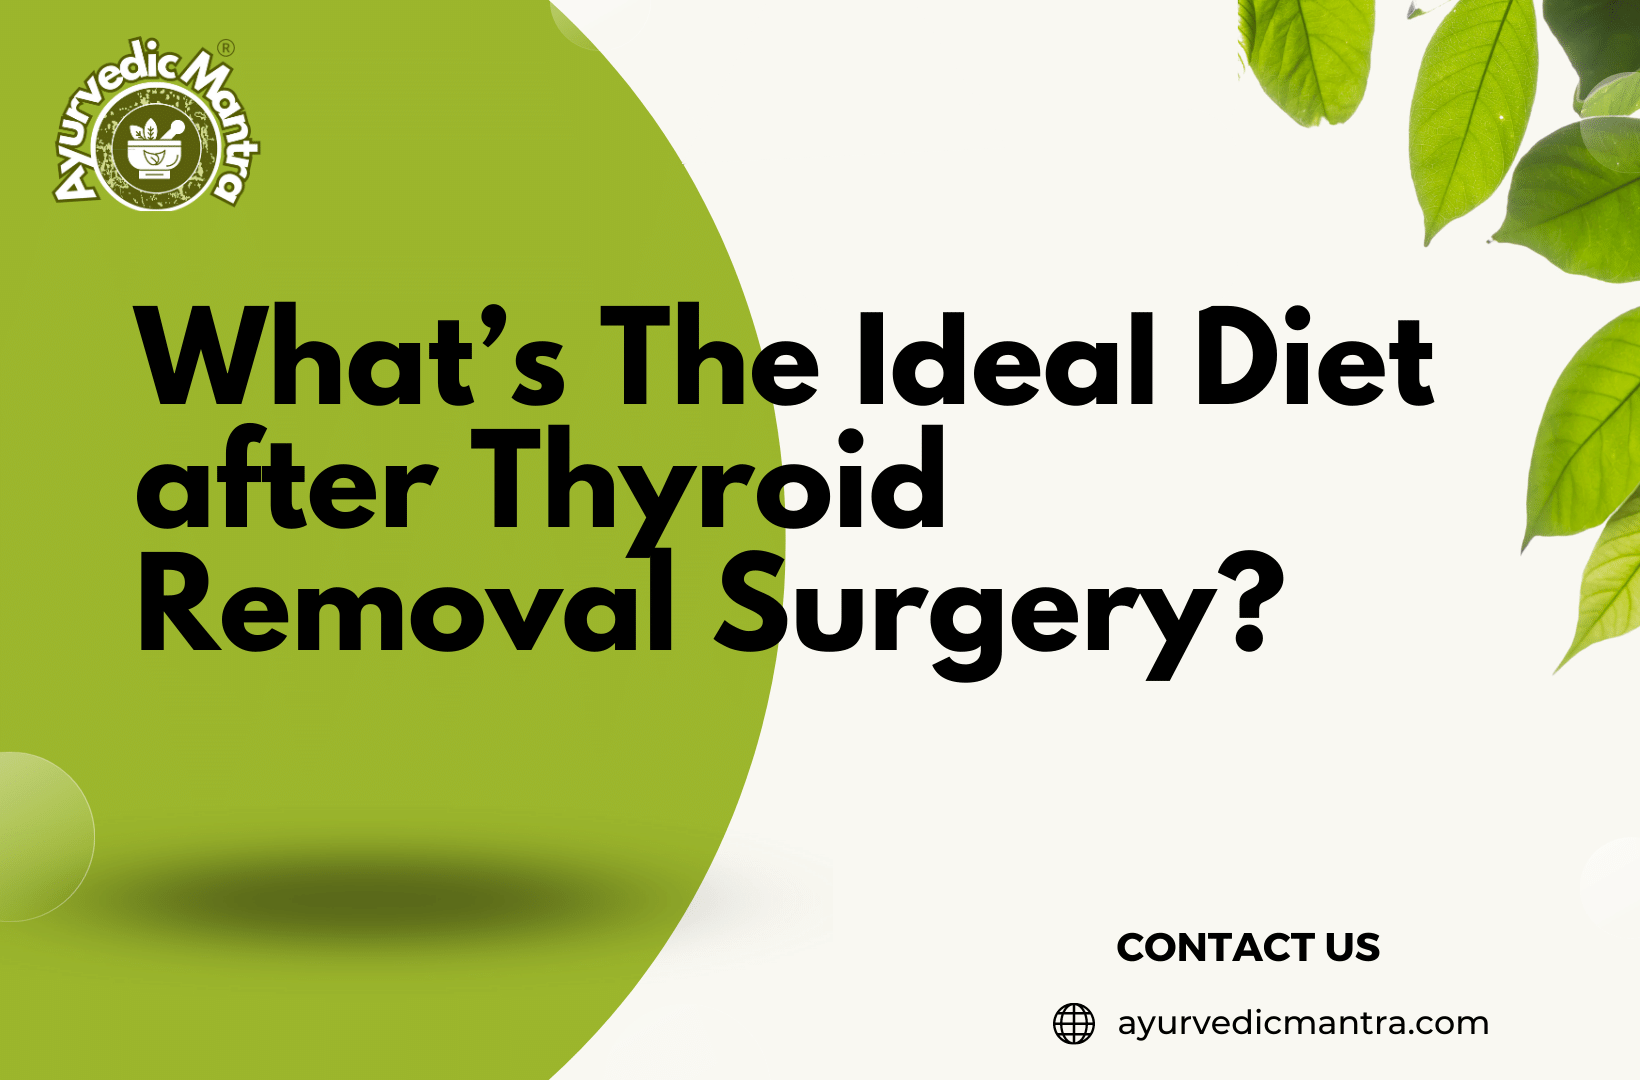 What’s The Ideal Diet after Thyroid Removal Surgery